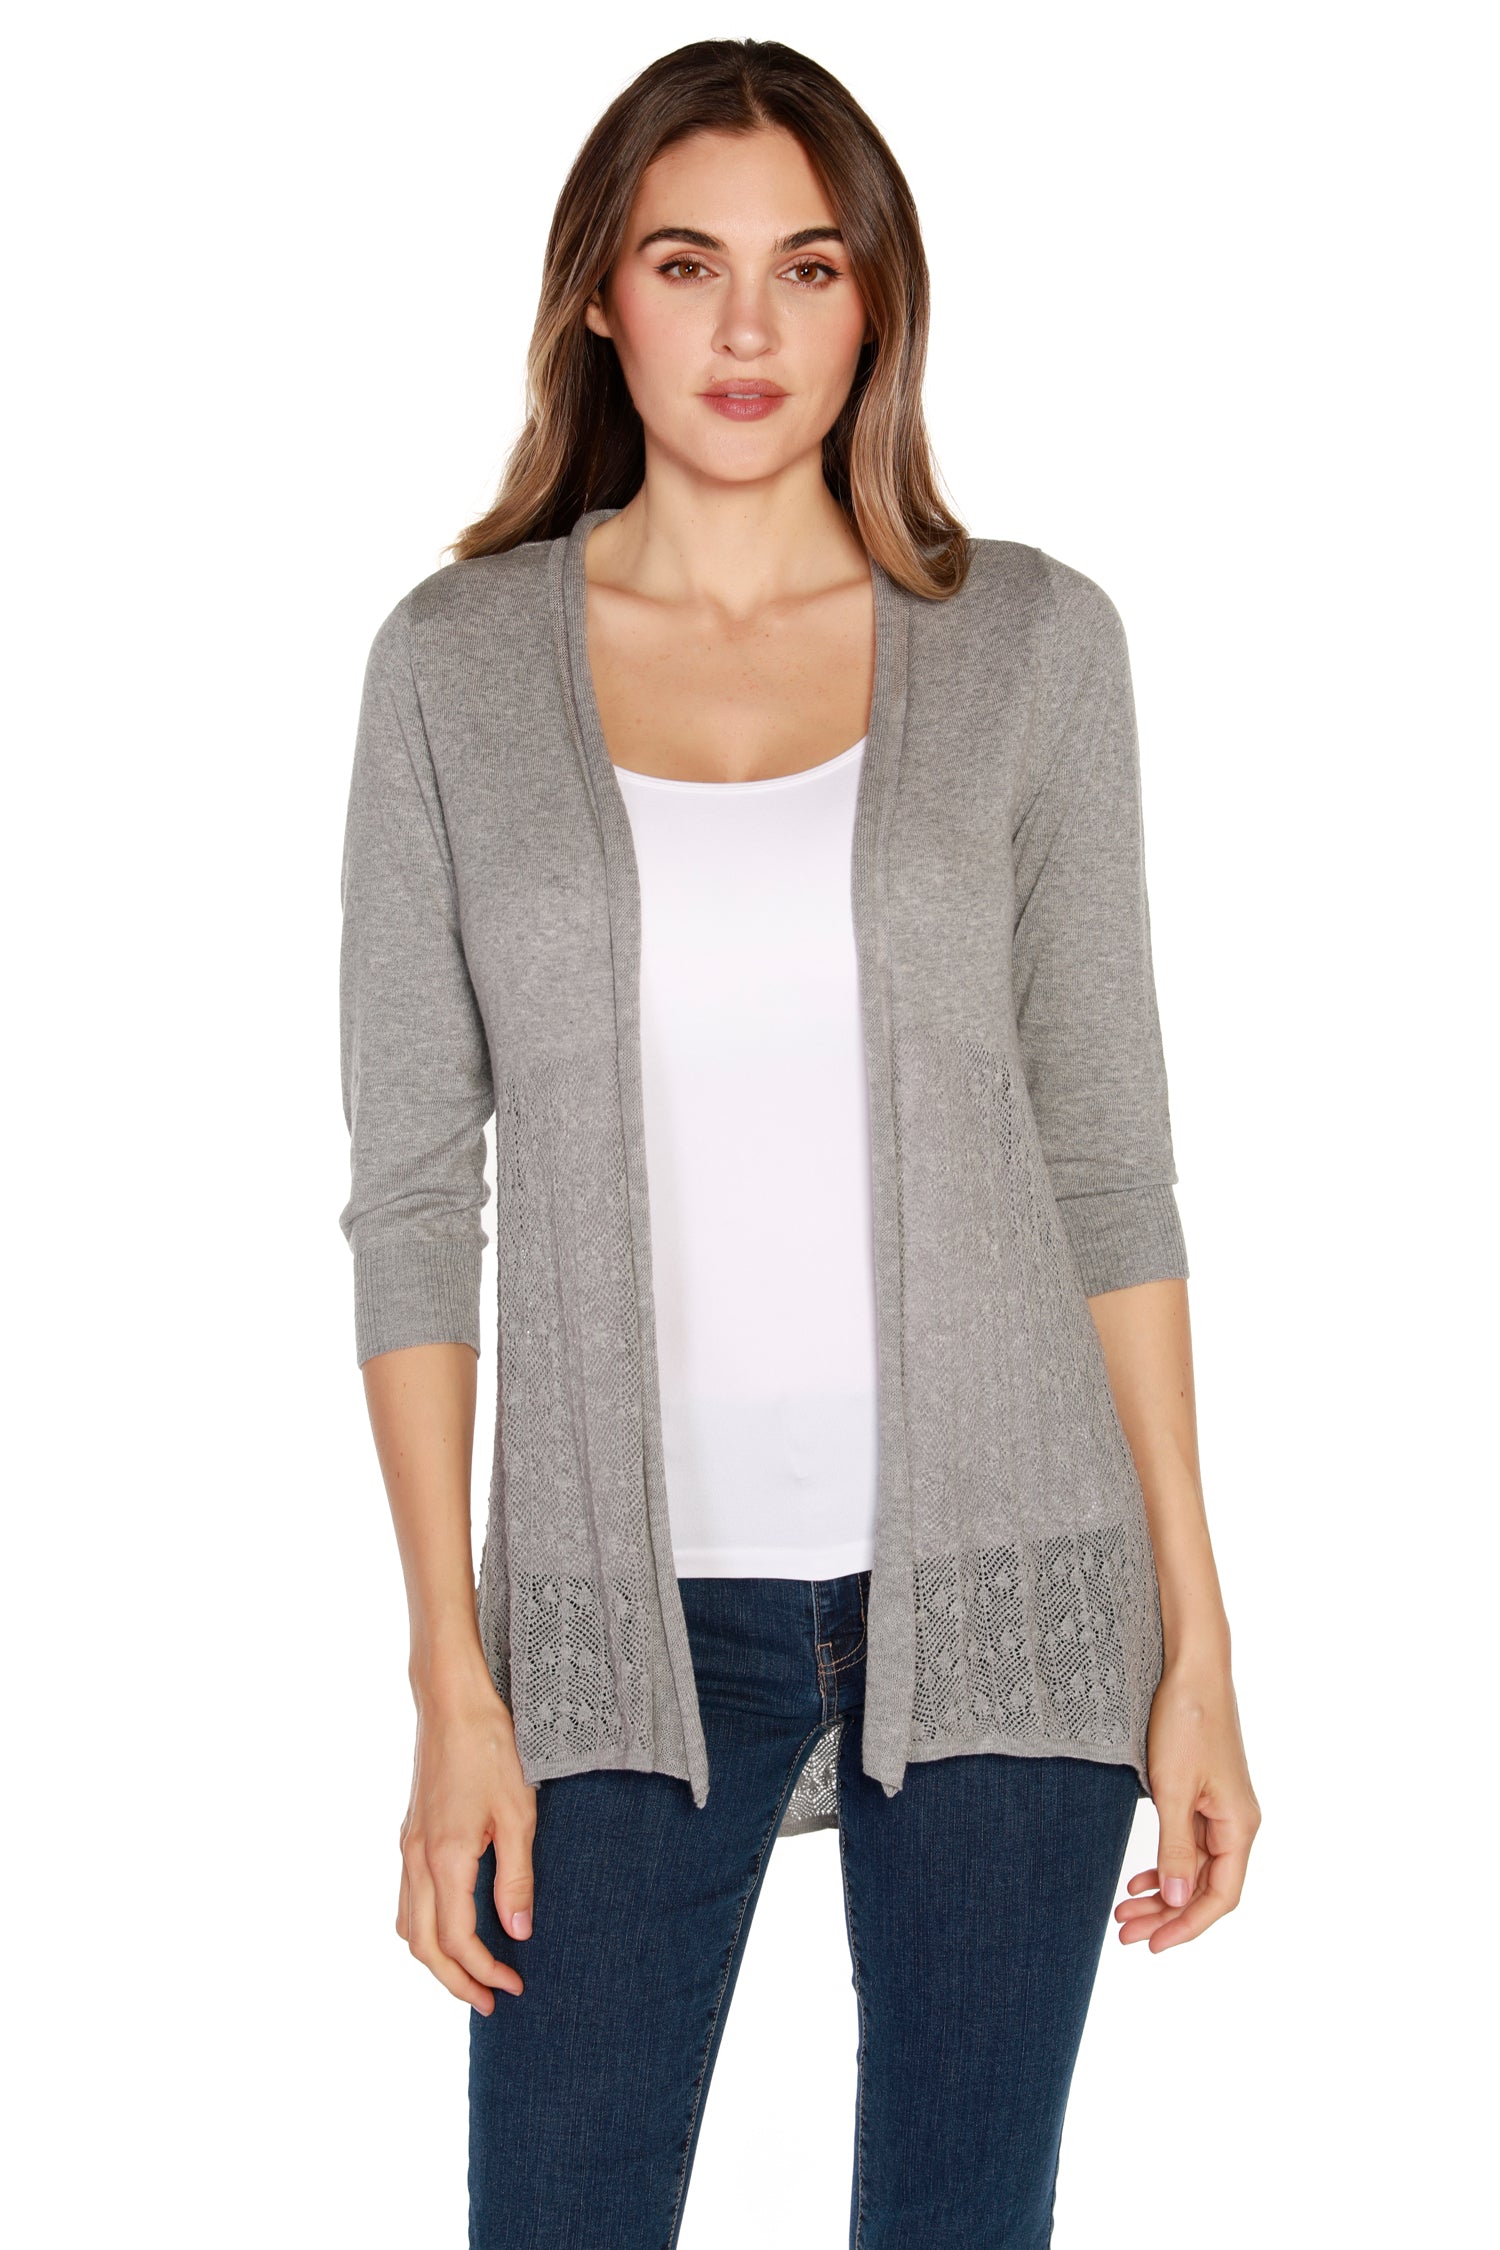 Women's Hi Low Cardigan Sweater in a Lightweight Knit with a Semi-Sheer Pointelle Stitch